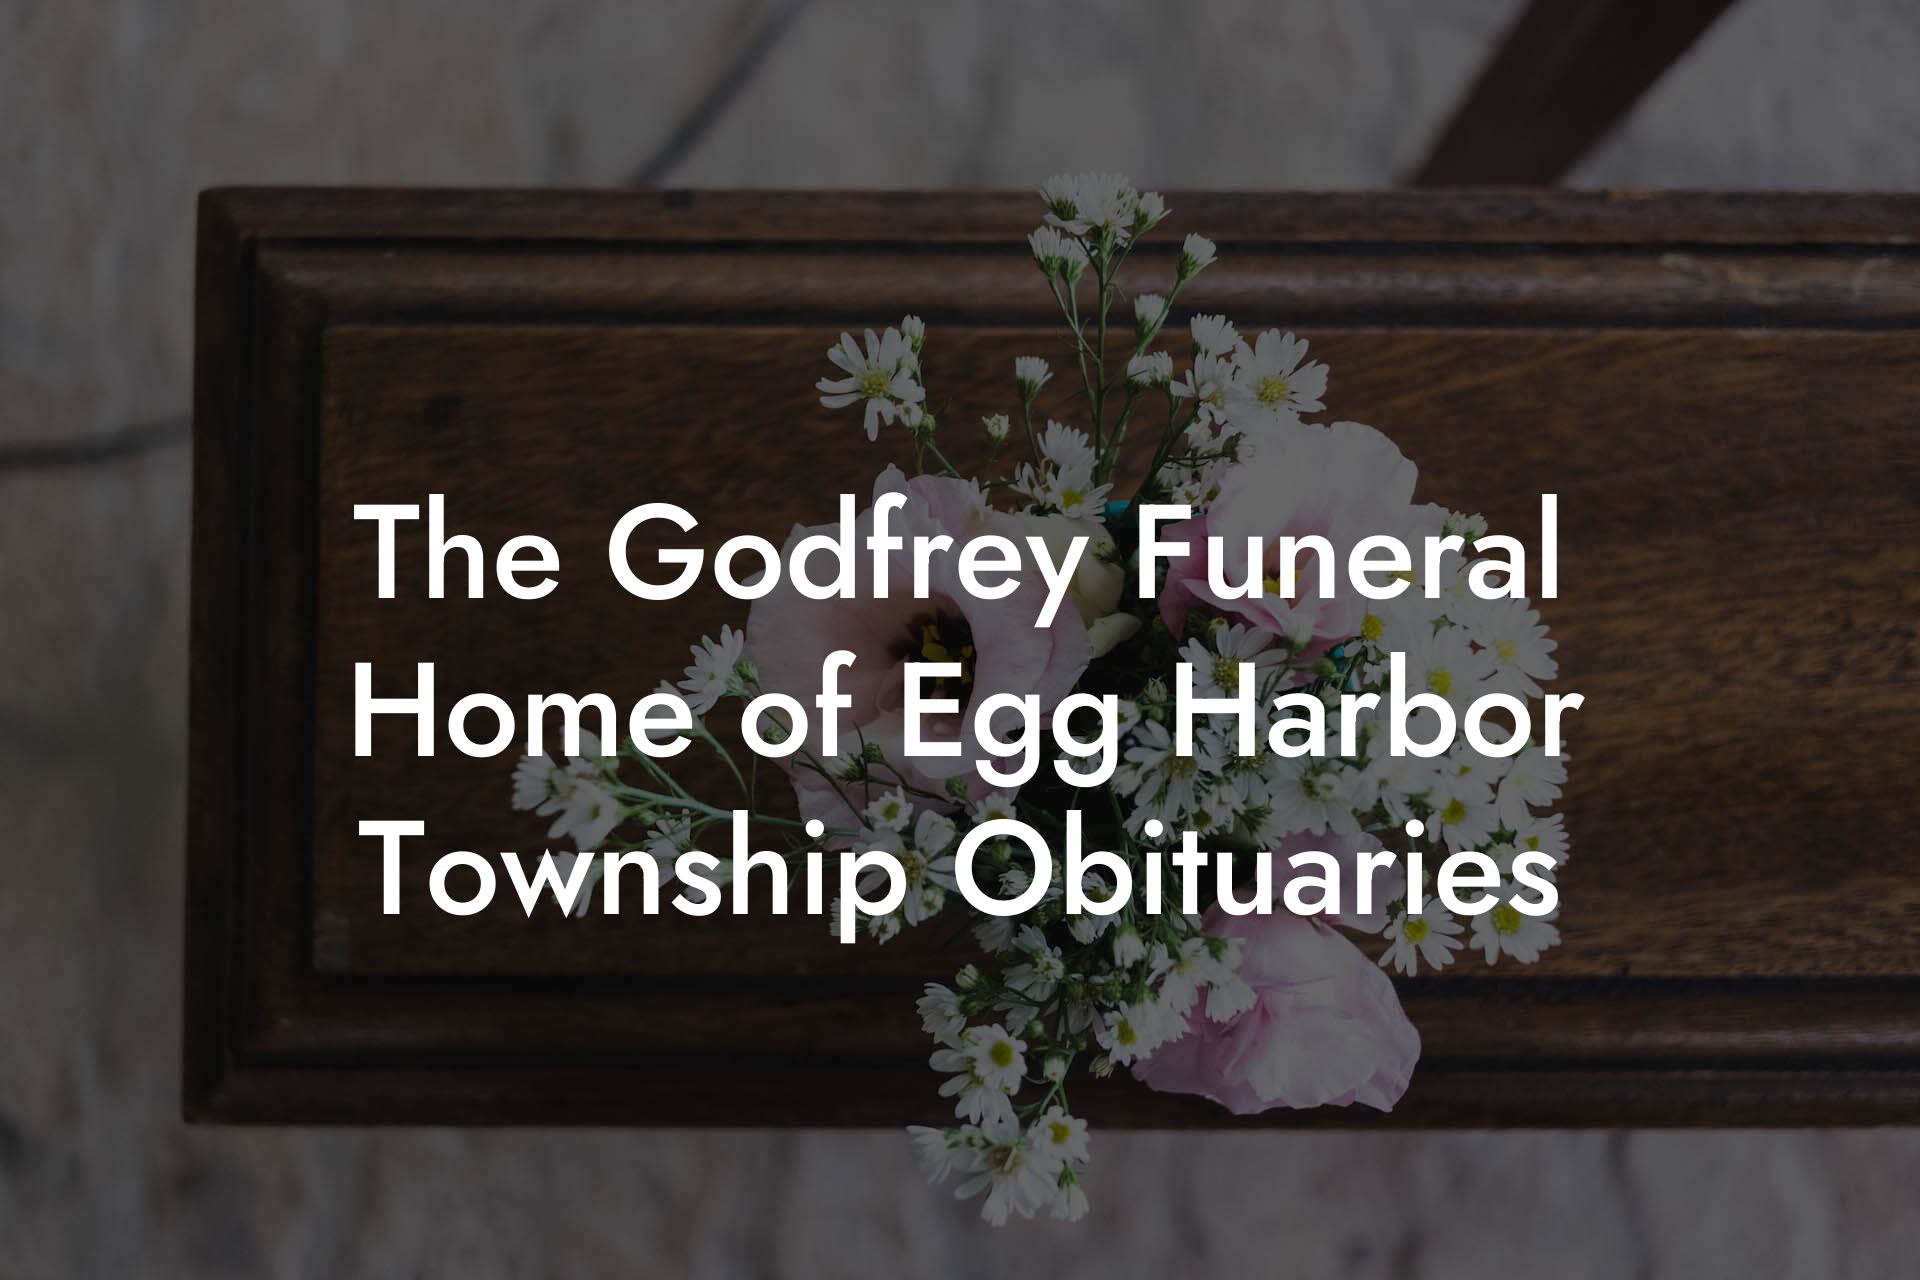 The Godfrey Funeral Home of Egg Harbor Township Obituaries